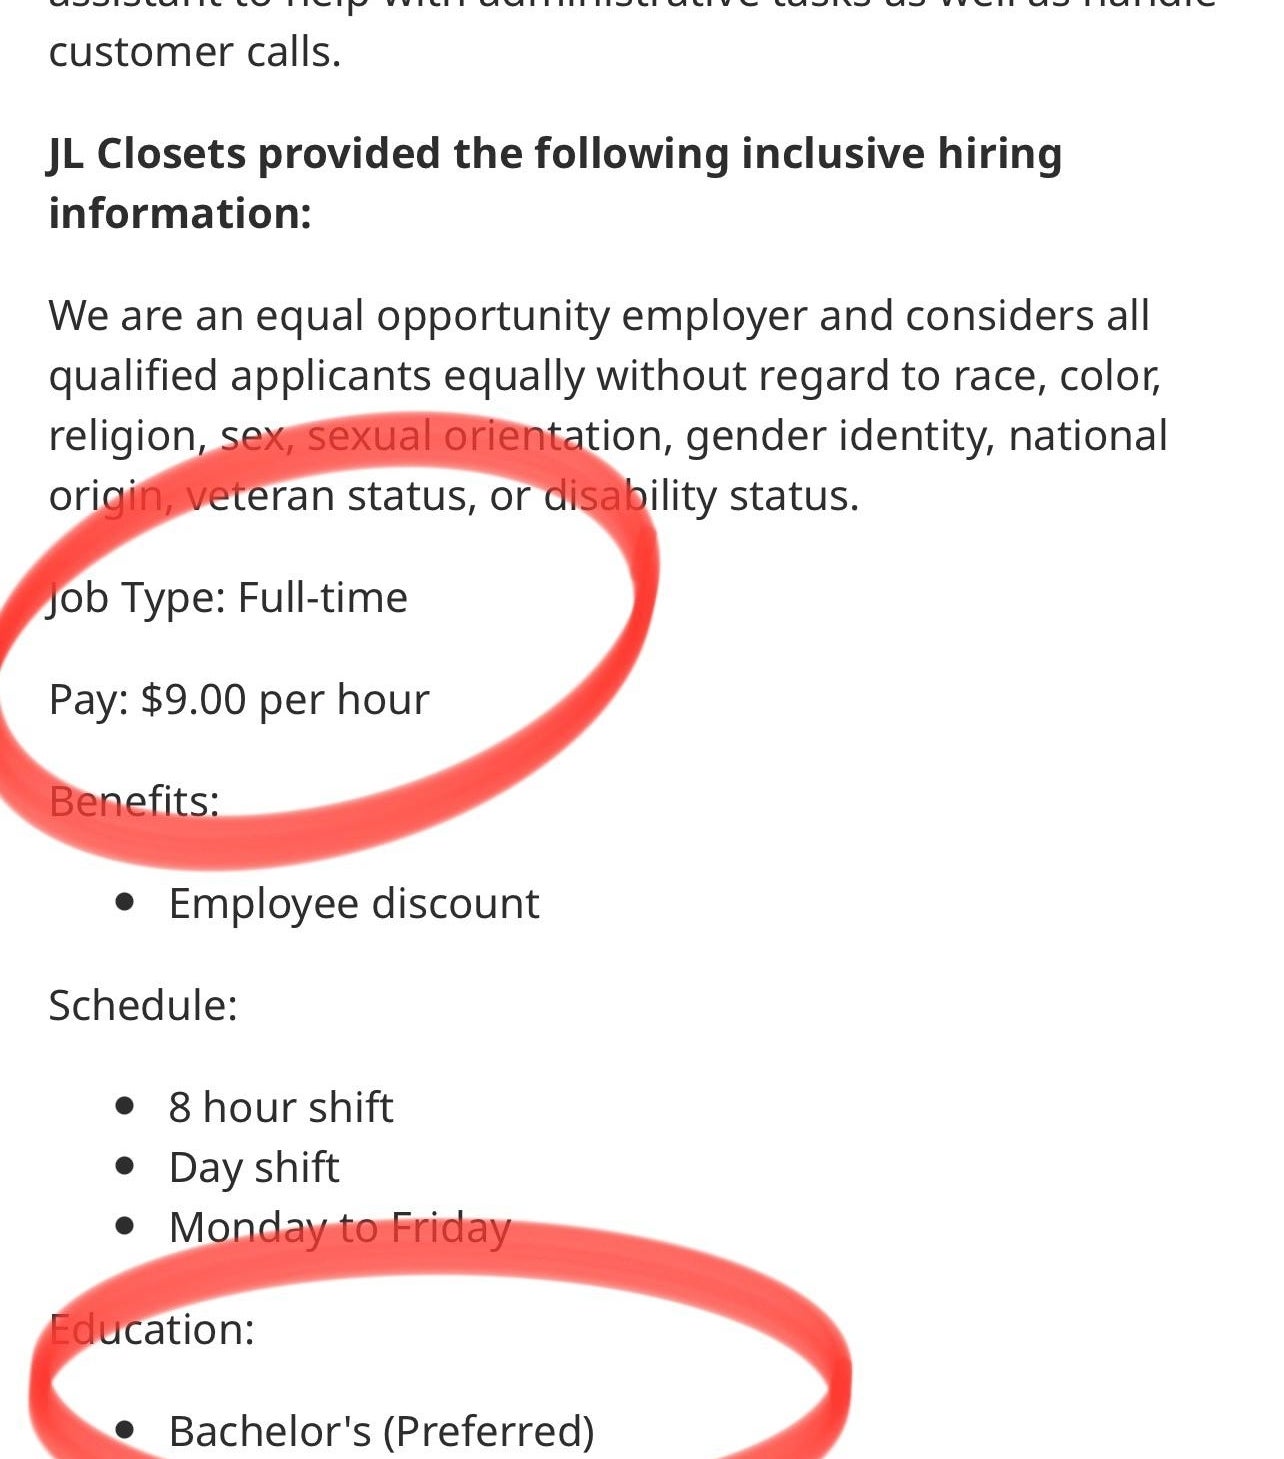 bachelor&#x27;s degree needed but pay is $9 an hour